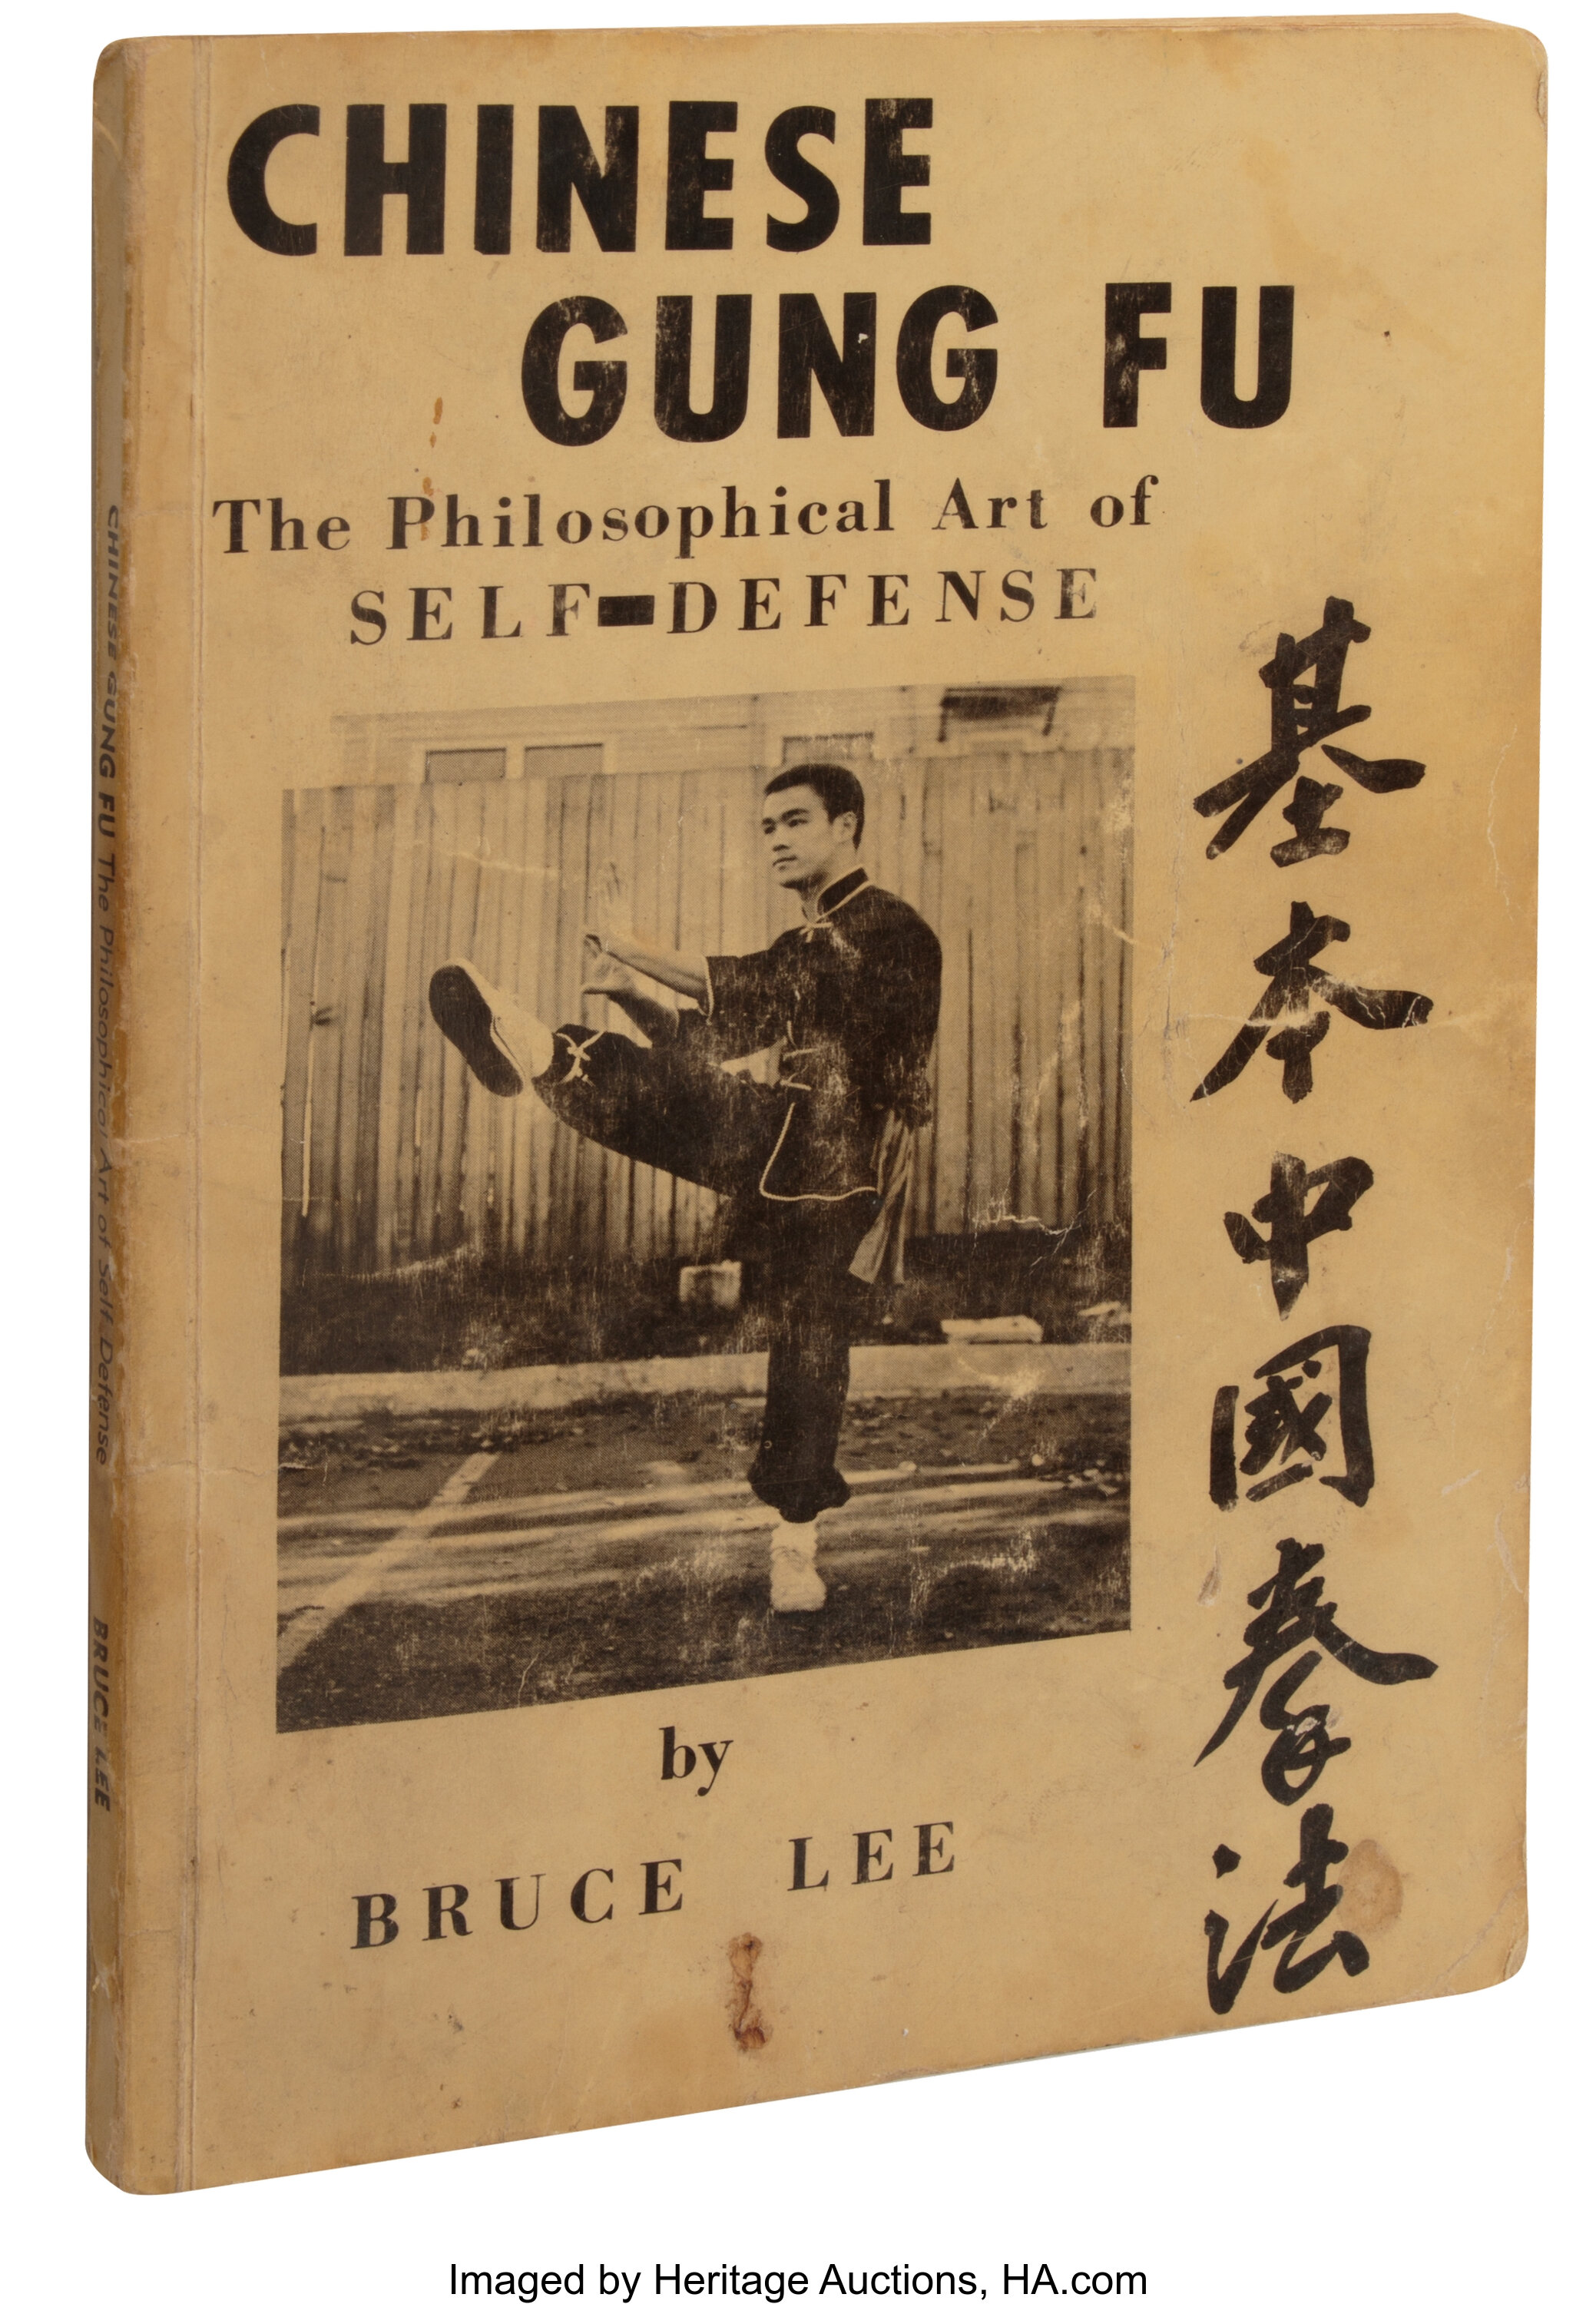 Chinese Gung Fu: The Philosophical Art of Self-Defense by Bruce | Lot  #89465 | Heritage Auctions